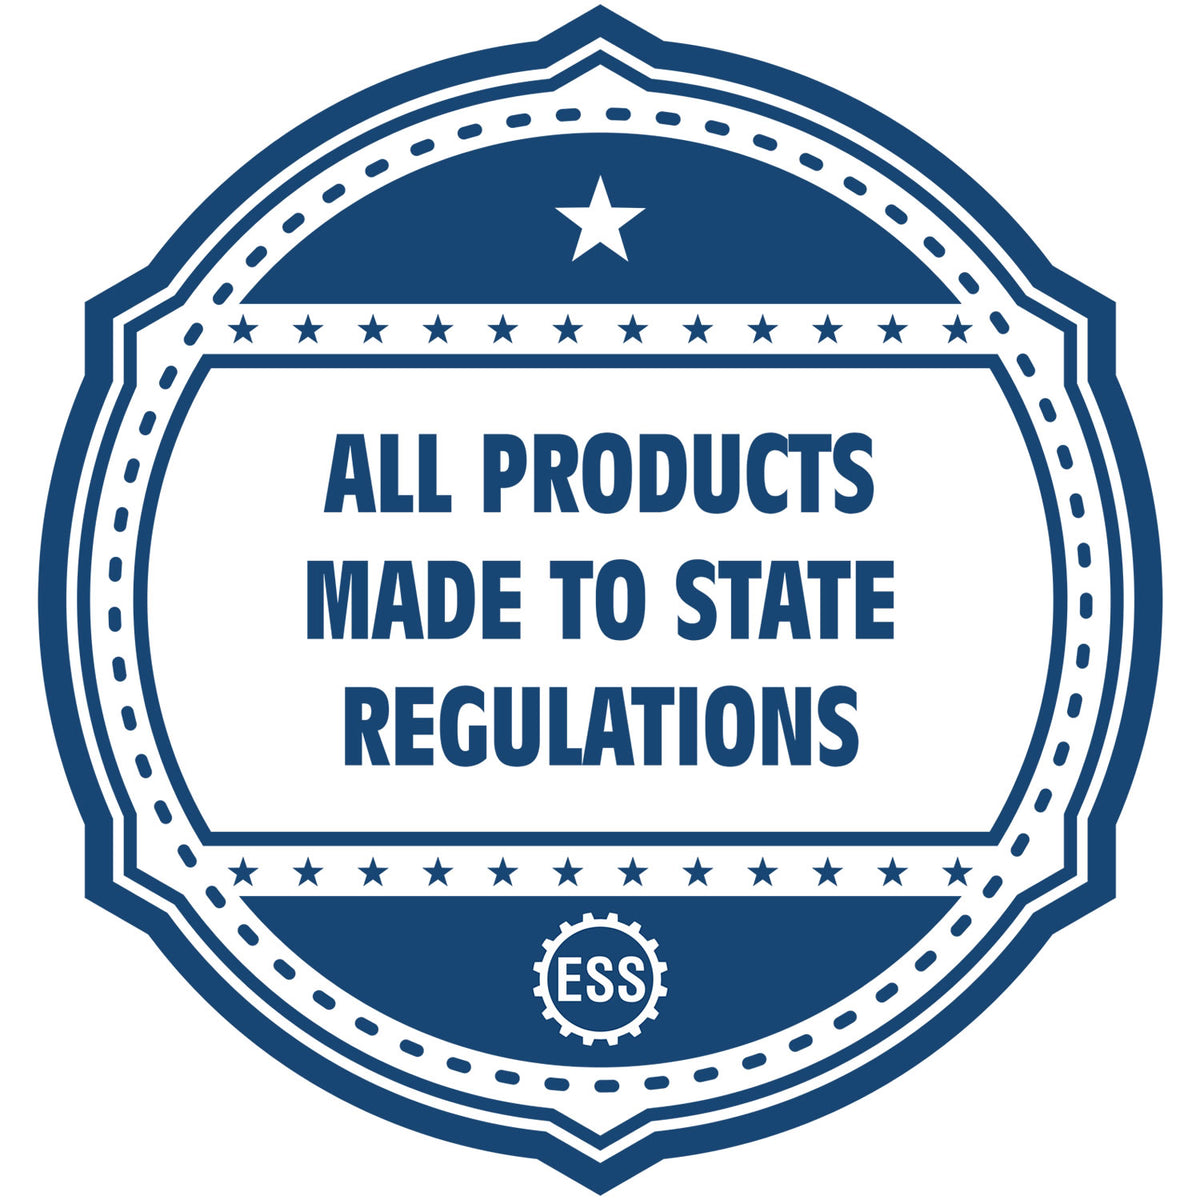 An icon or badge element for the Digital Wisconsin PE Stamp and Electronic Seal for Wisconsin Engineer showing that this product is made in compliance with state regulations.